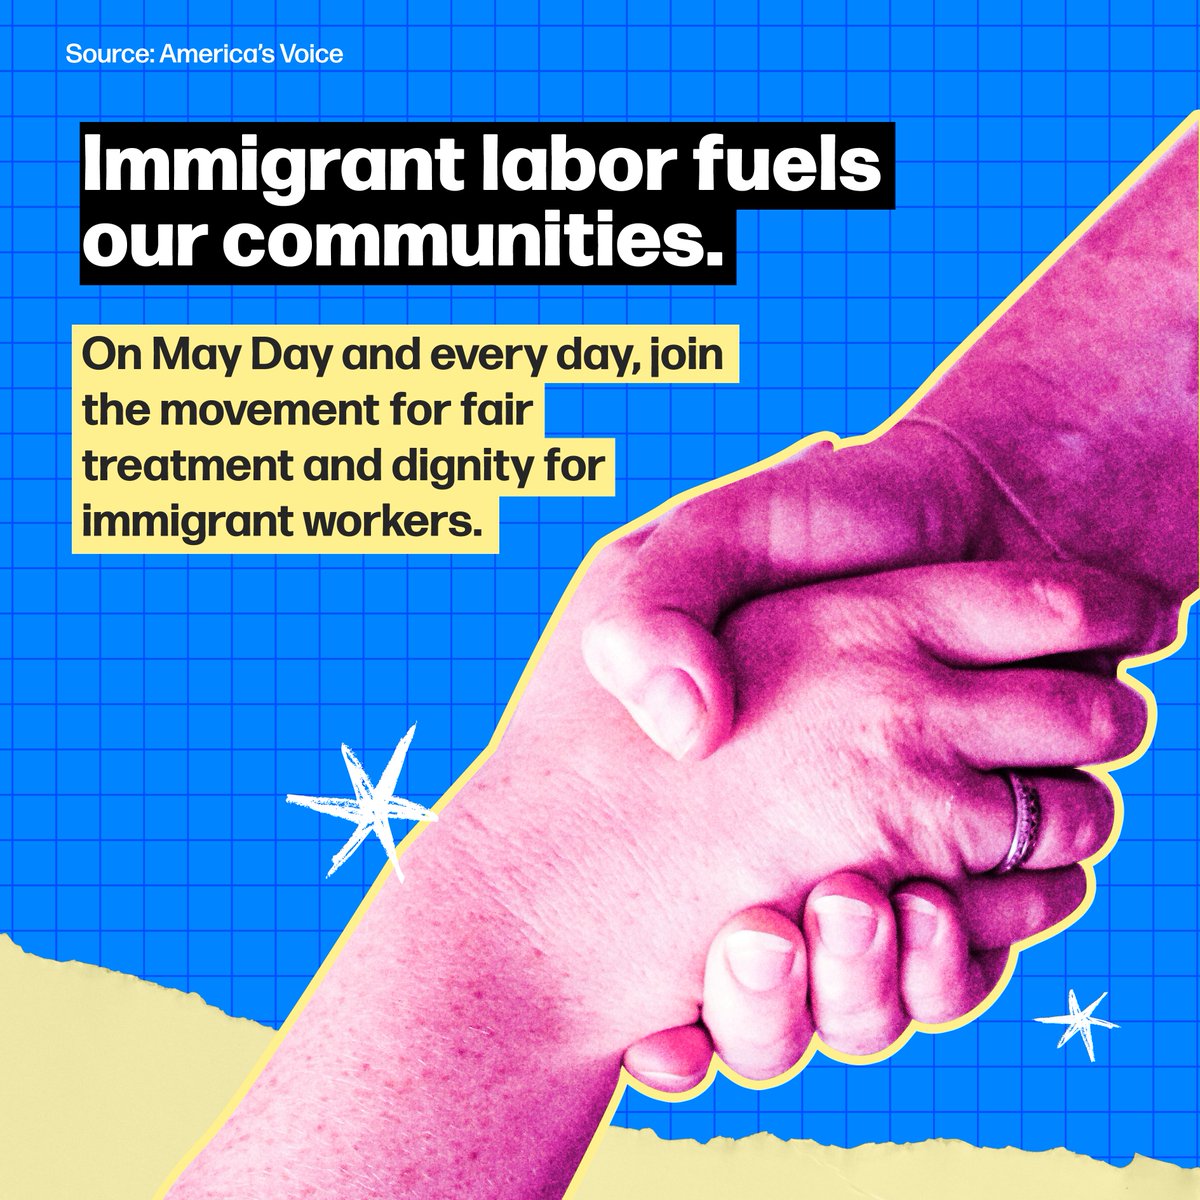 Immigrant labor powers our communities, yet too often, their contributions go unrecognized. This #MayDay, let's honor their hard work and dedication by advocating for fair treatment and dignity in the workplace. Join the movement for immigrant rights.